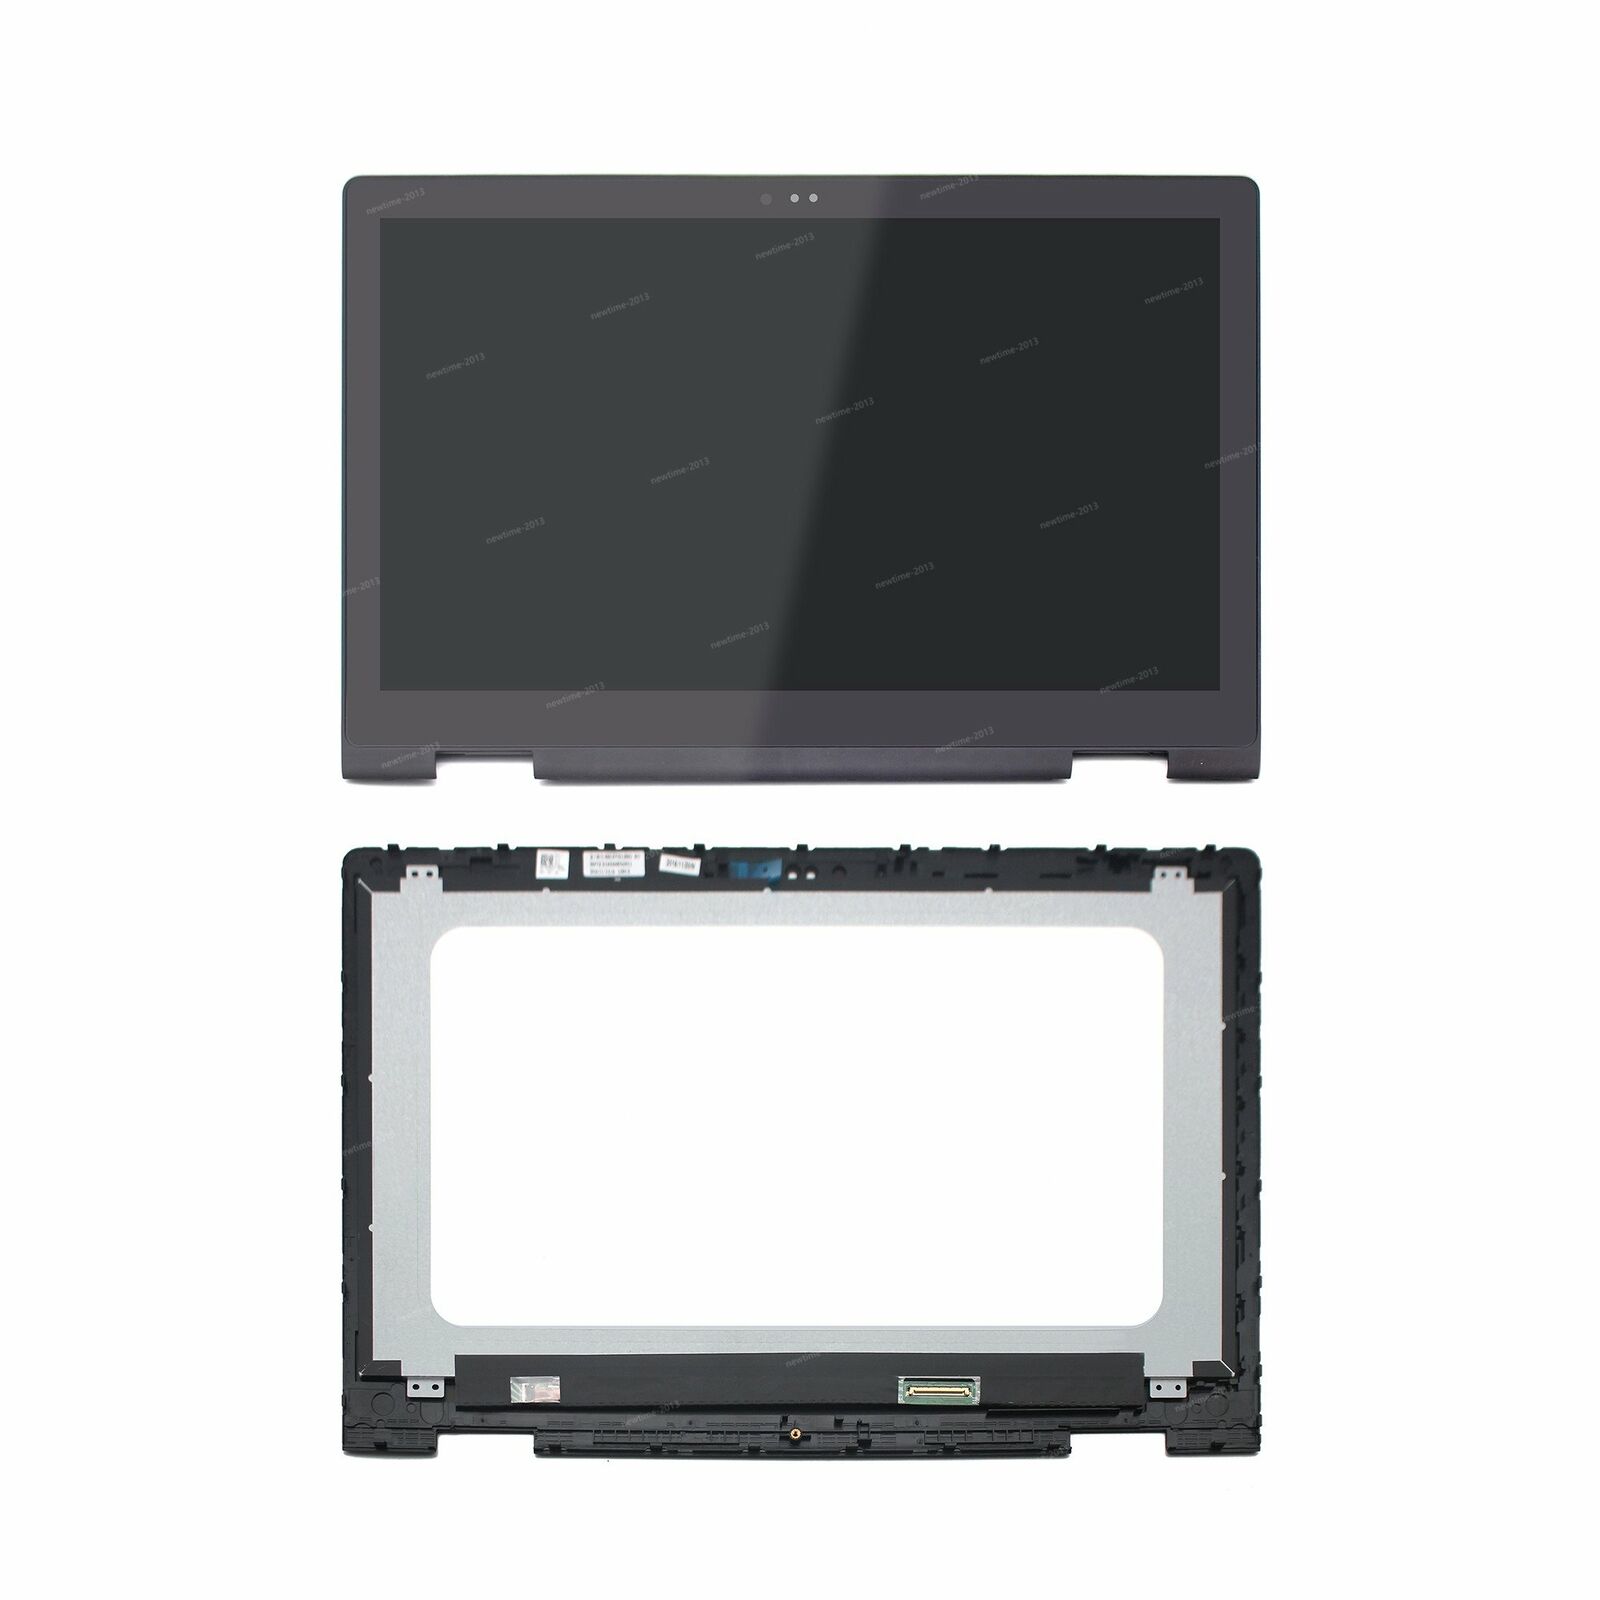 FHD LCD Touch Screen Digitizer +Bezel For Dell Inspiron 15 5568 5578 5579 00079Y